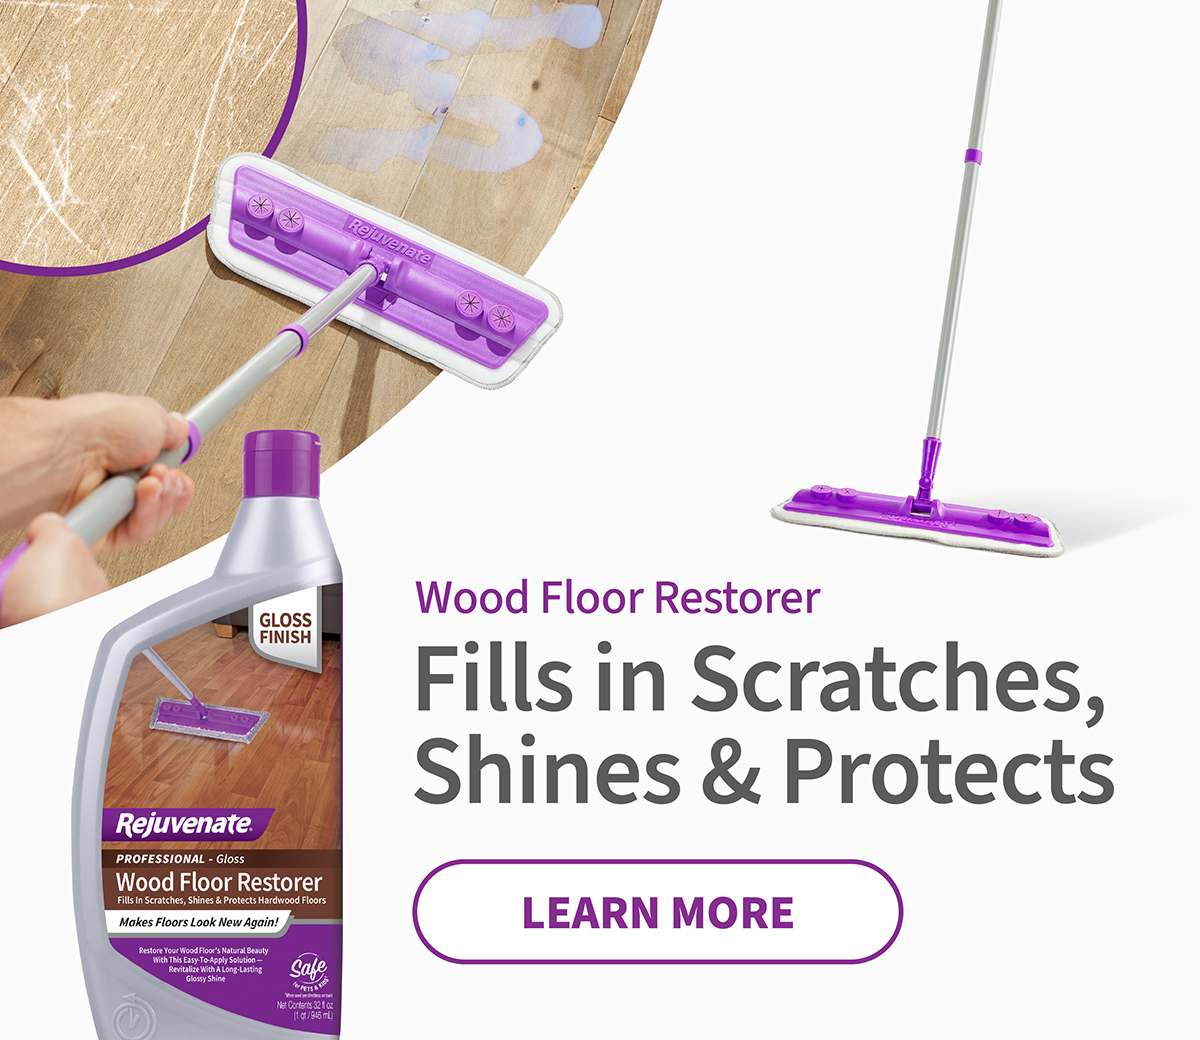 Carousel Banner (Mobile) Wood Floor Restorer - Fills in Scratches, Shines & Protects